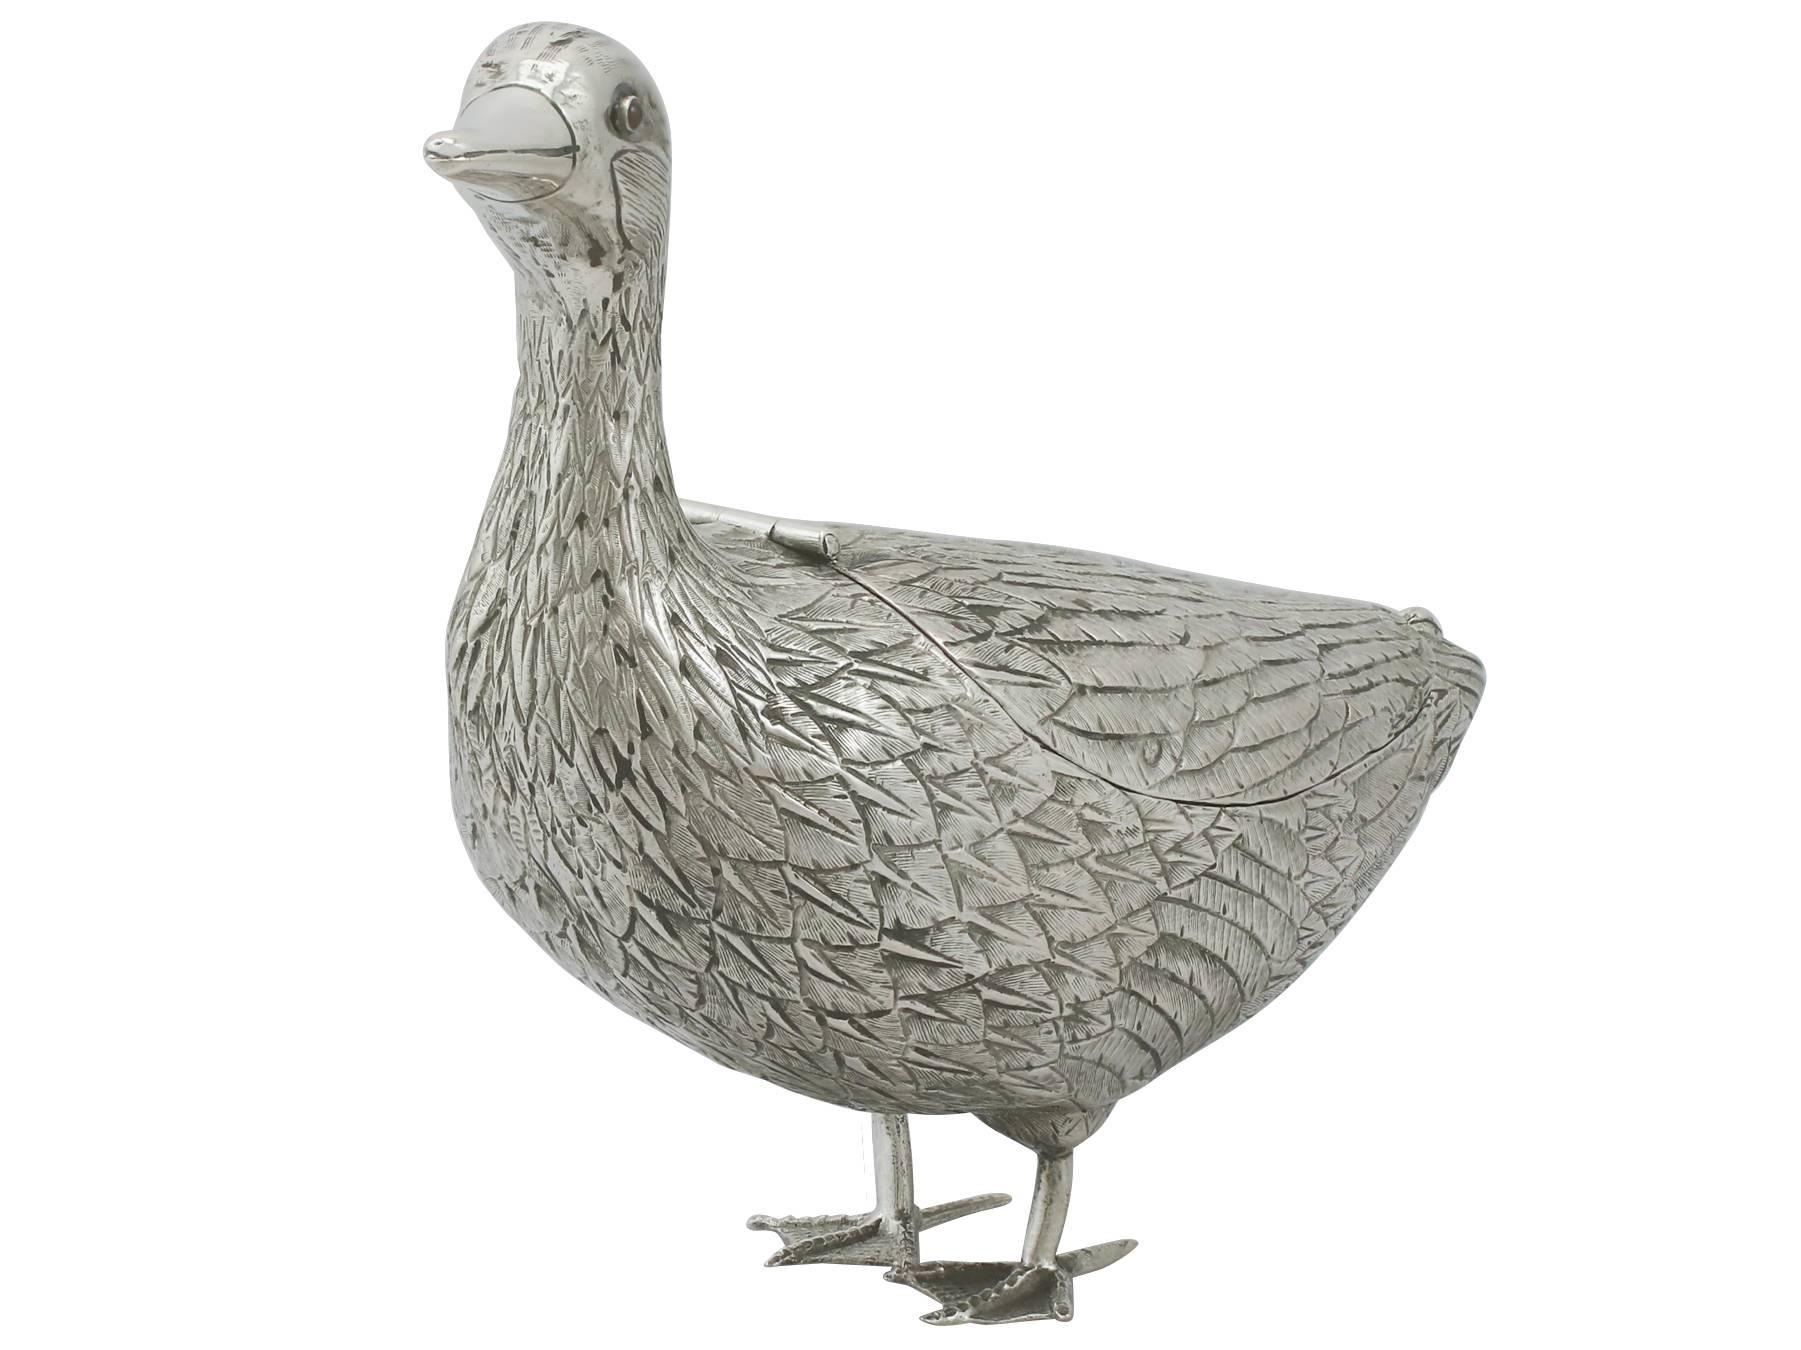 An exceptional, fine and impressive antique Dutch silver sugar box realistically modelled in the form of a duck; an addition to our animal related silverware collection

This exceptional antique Dutch silver sugar box has been realistically